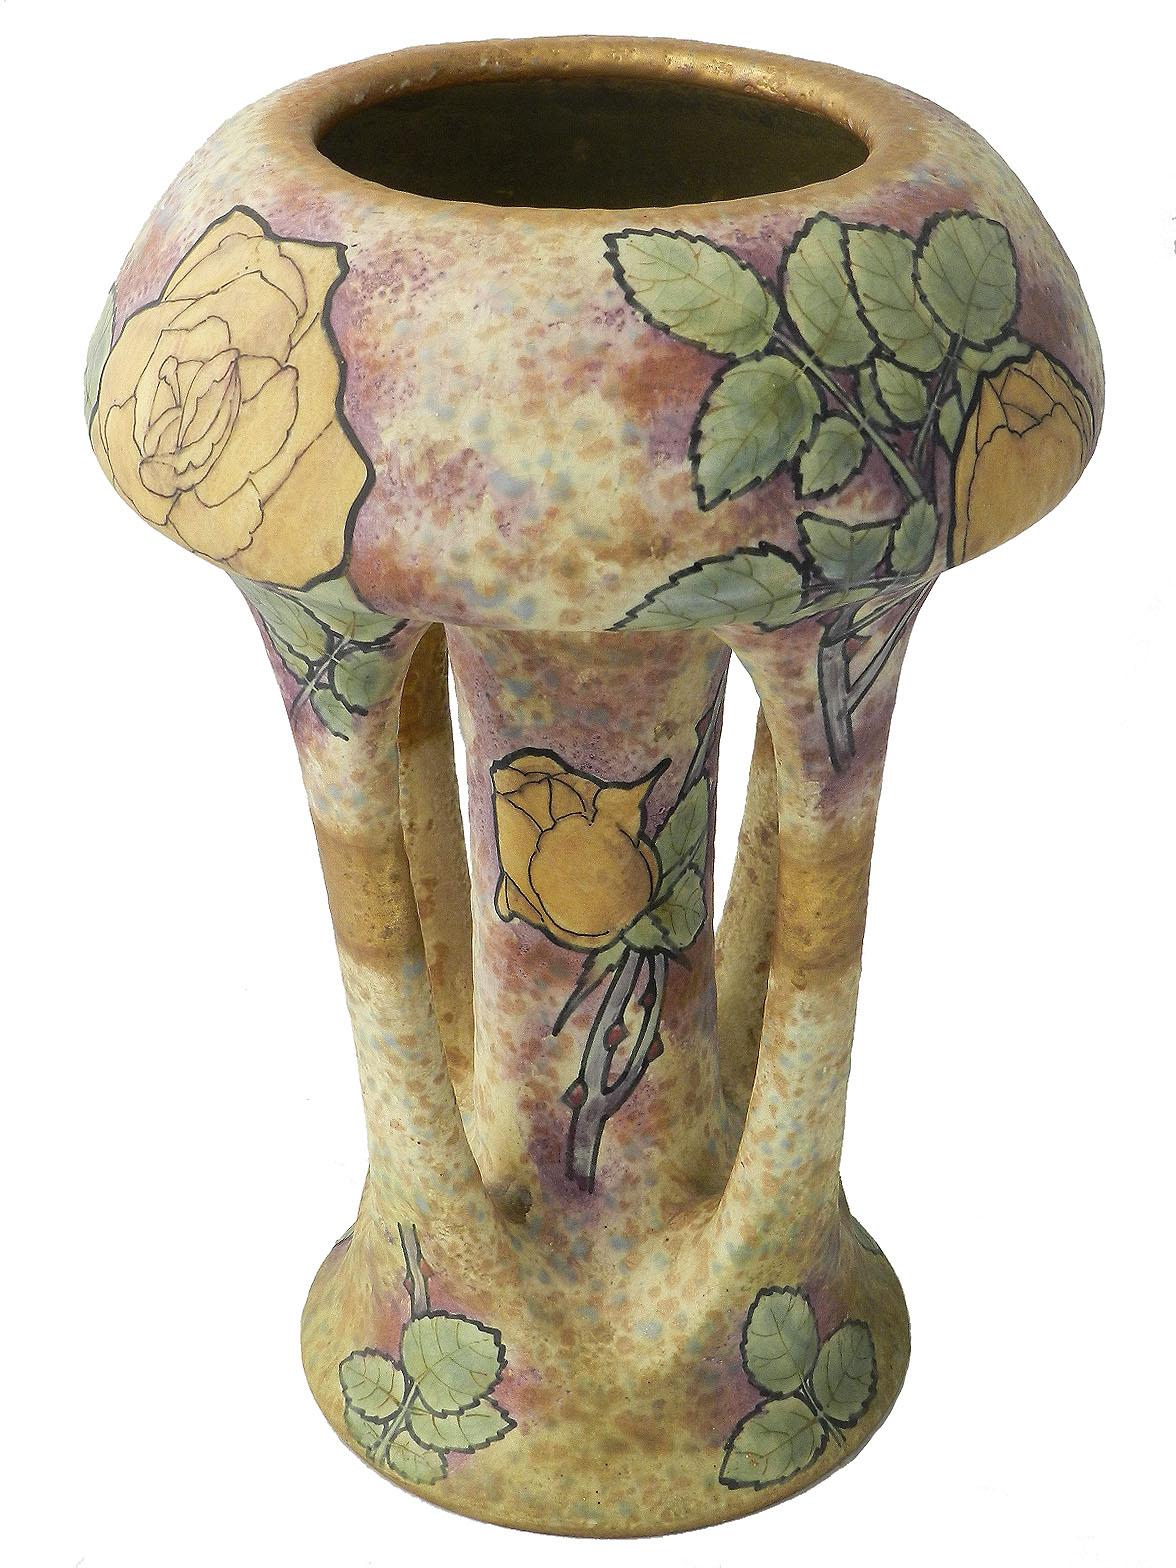 Art Nouveau Amphora vase by Amphora, Austria, circa 1900 
Large
Hand decorated 
Superb quality Marked to base with crown and number
Excellent condition for its age 
Manufactured for Riessner, Stellmacher & Kessel (RStK) Amphora of Turn-Teplitz,